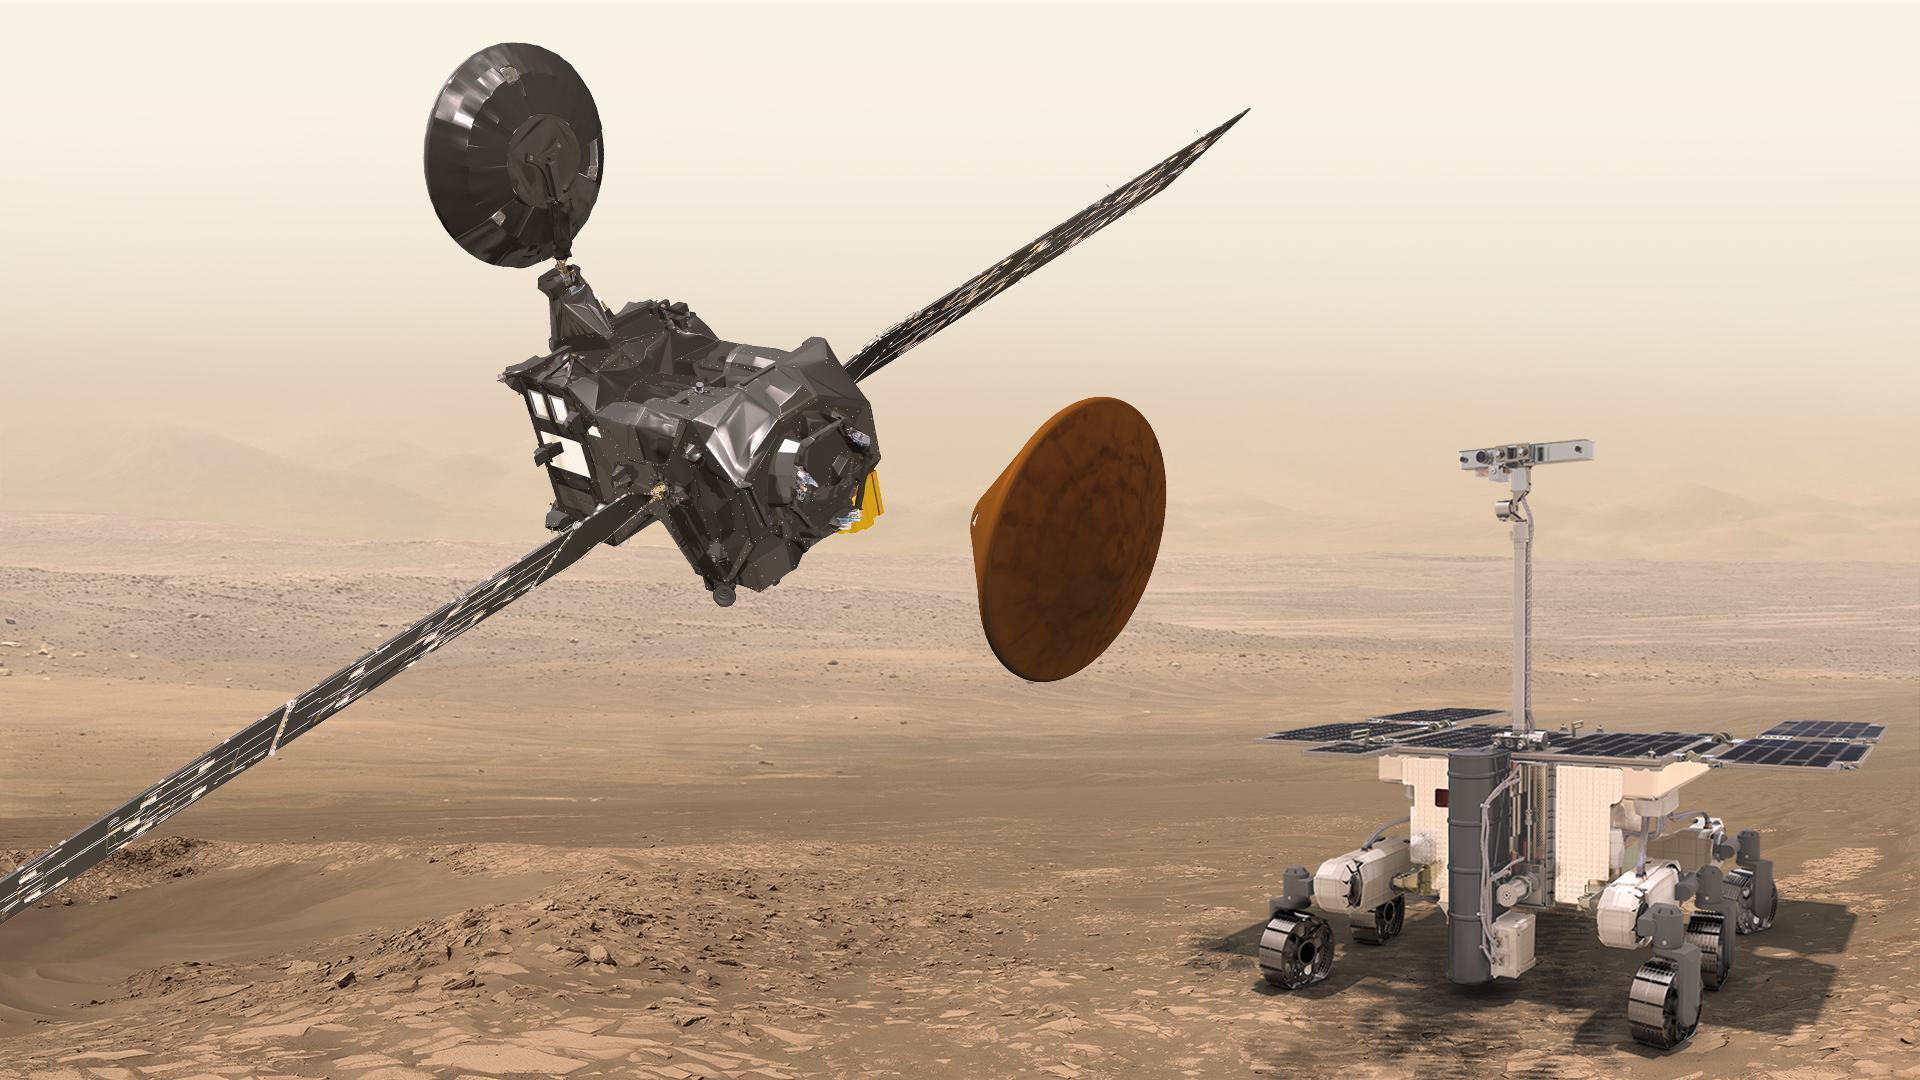 Trace_Gas_Orbiter_Schiaparelli_and_the_ExoMars_rover_at_Mars